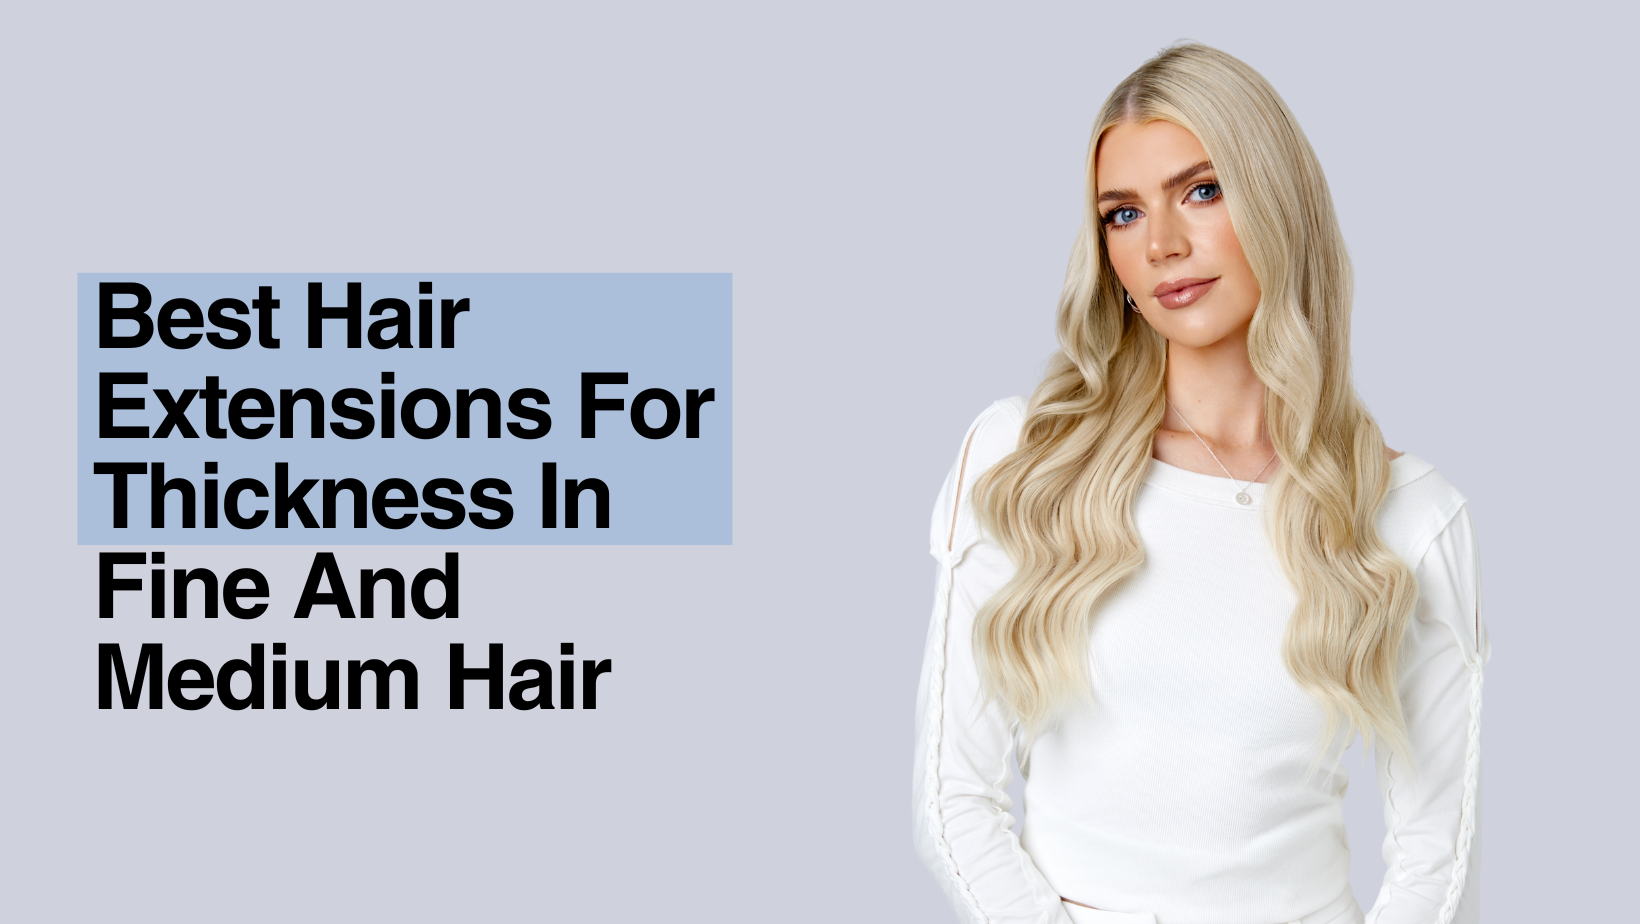 Best Hair Extensions For Thickness In Fine And Medium Hair